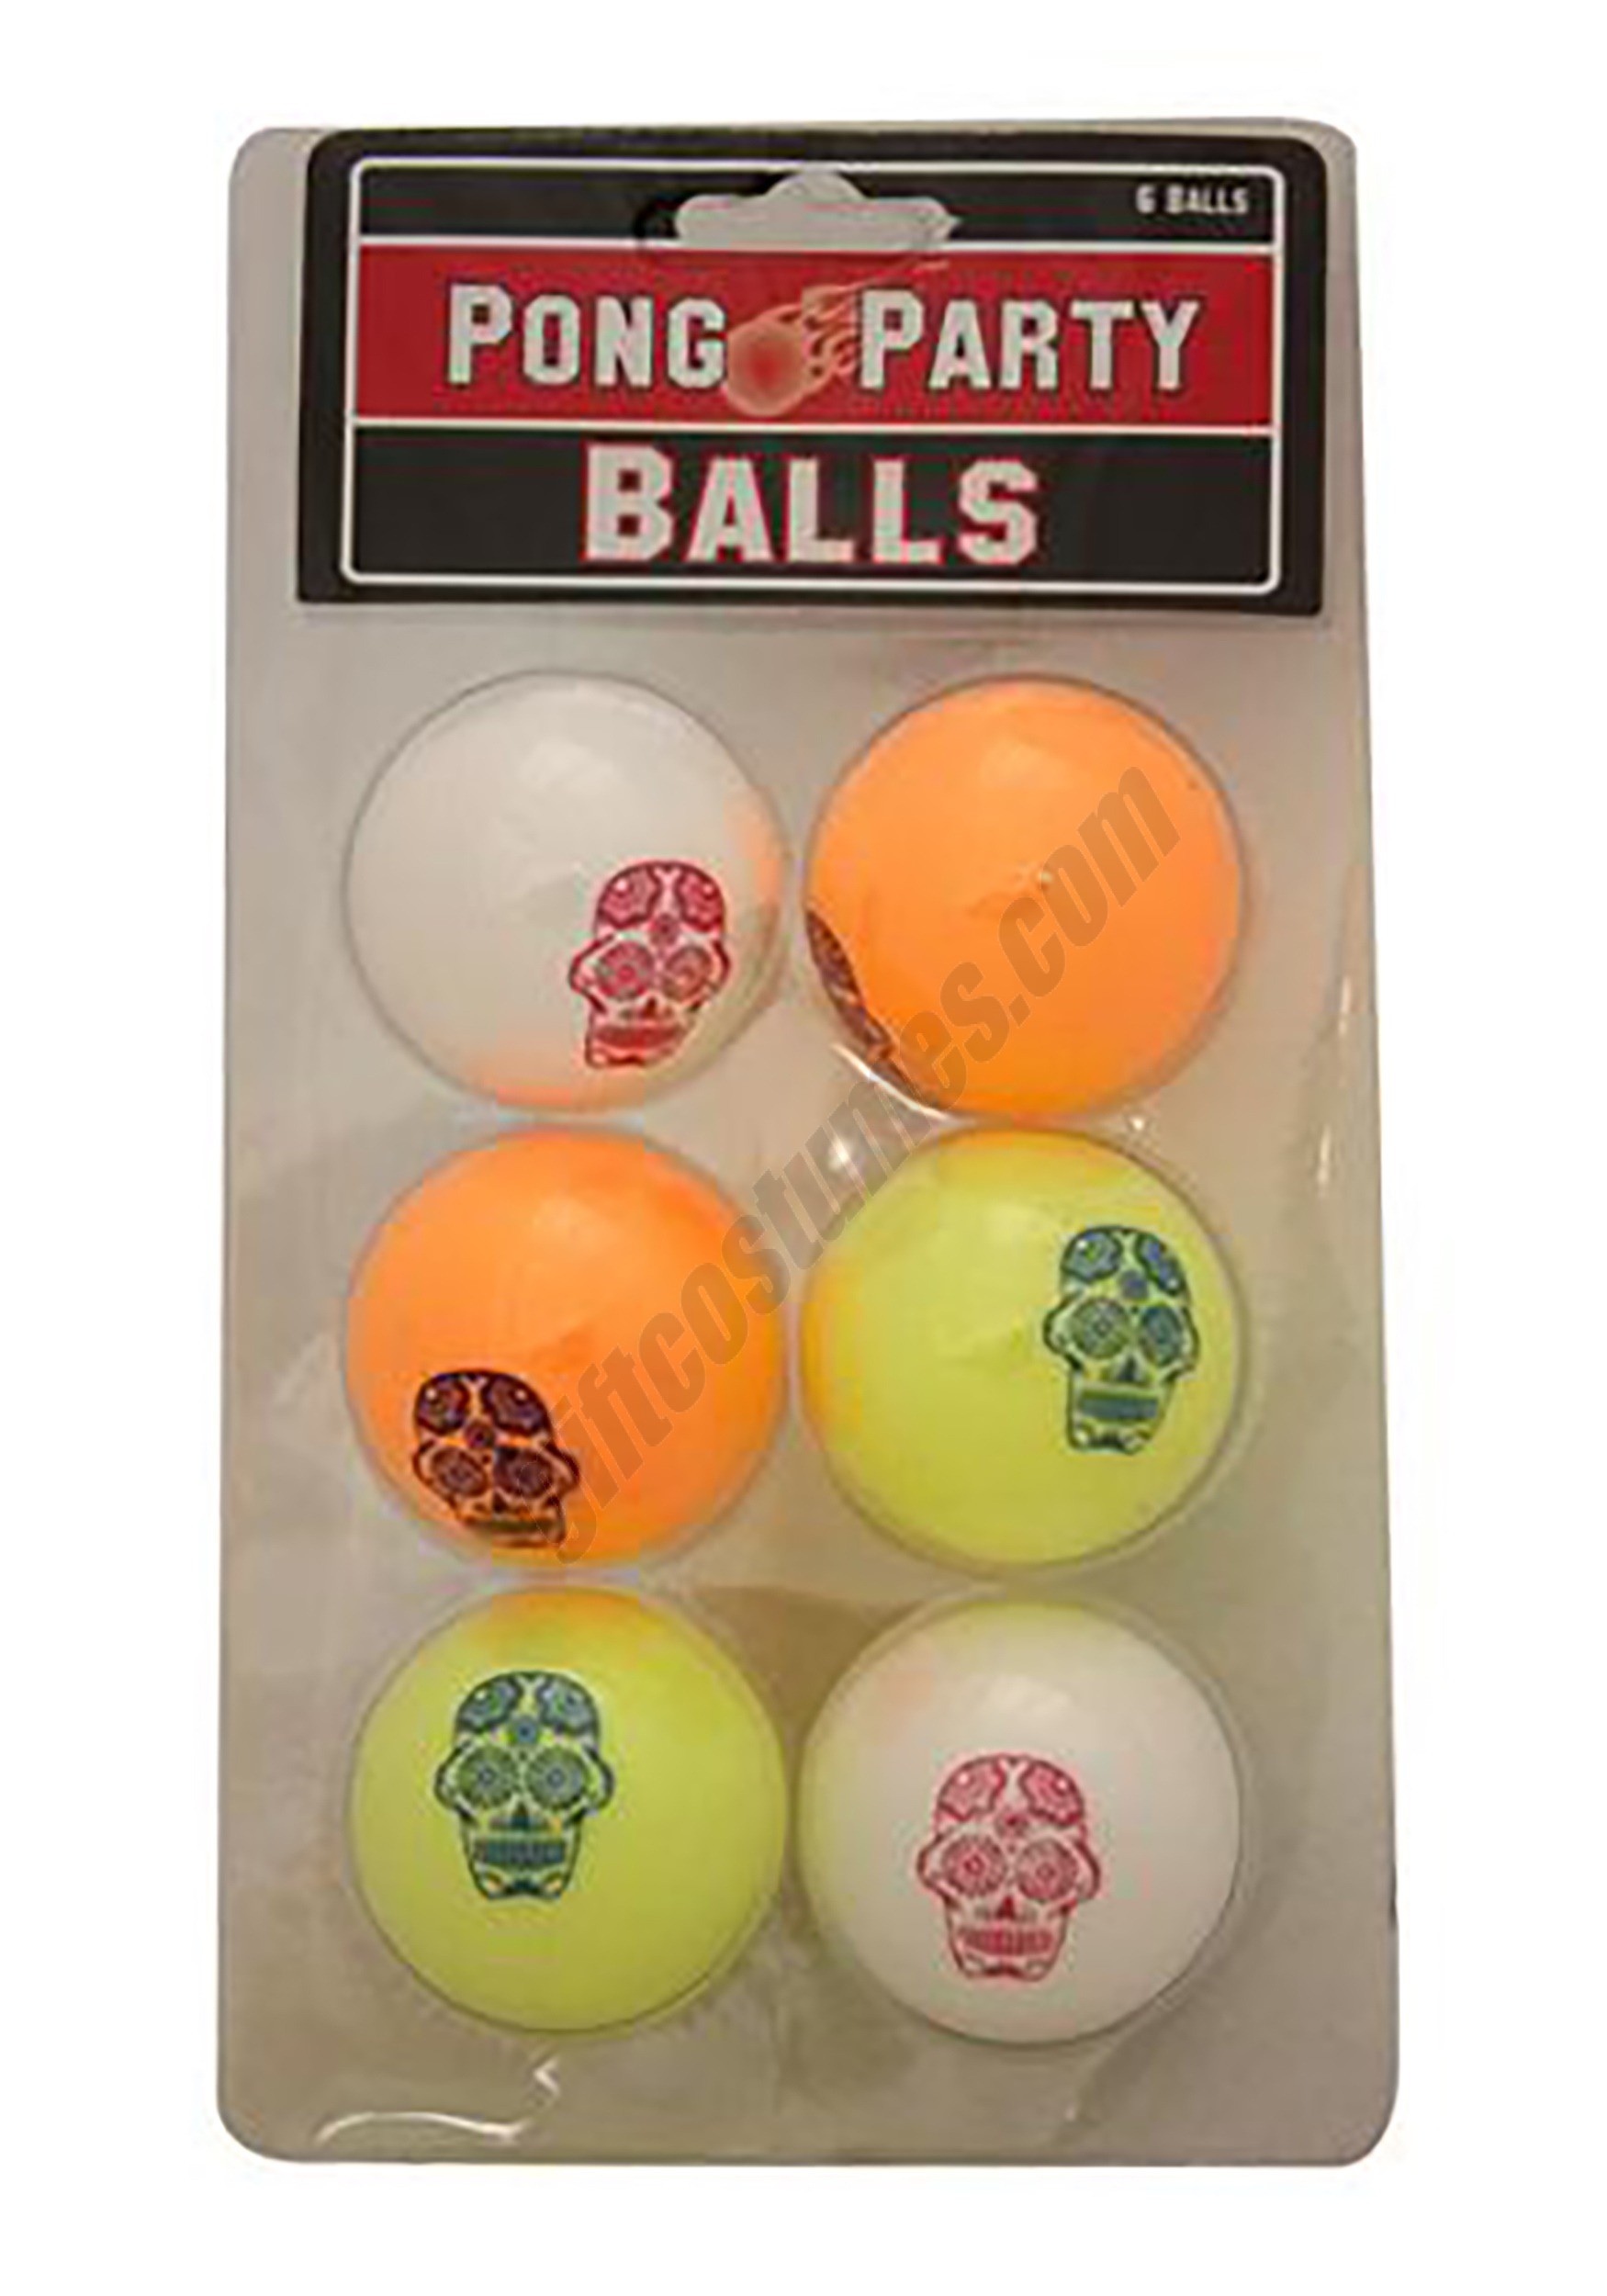 Candy Skull Day of the Dead Beer Pong Balls Promotions - Candy Skull Day of the Dead Beer Pong Balls Promotions